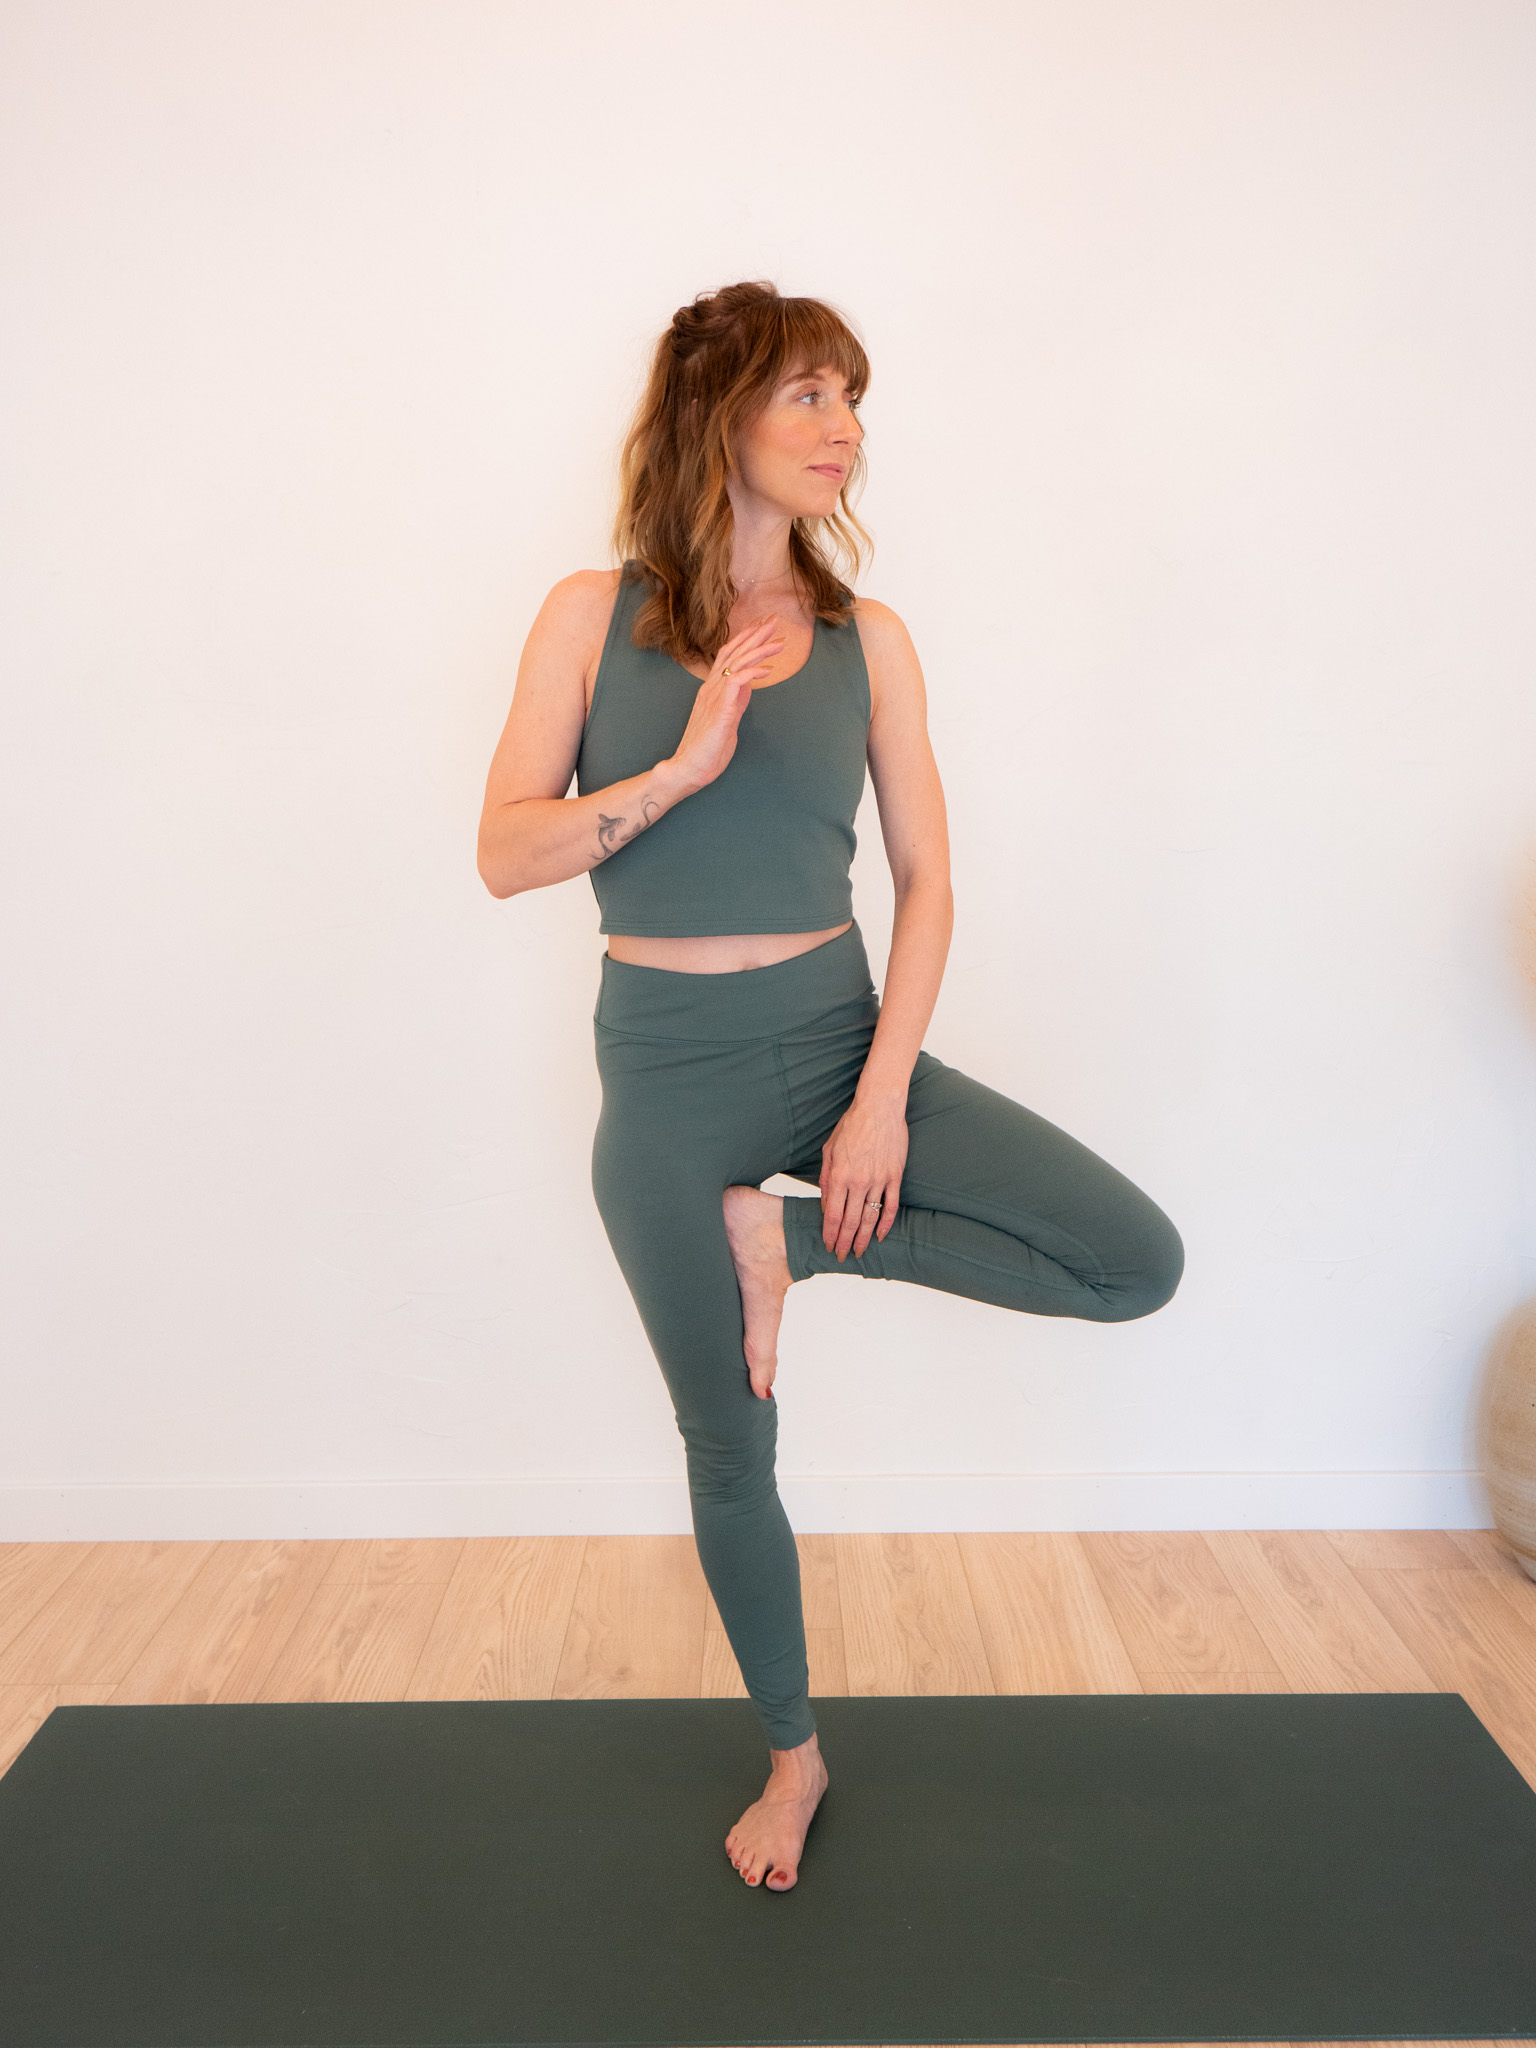 A woman in a green yoga outfit performs a tree pose on a yoga mat against a plain white wall.